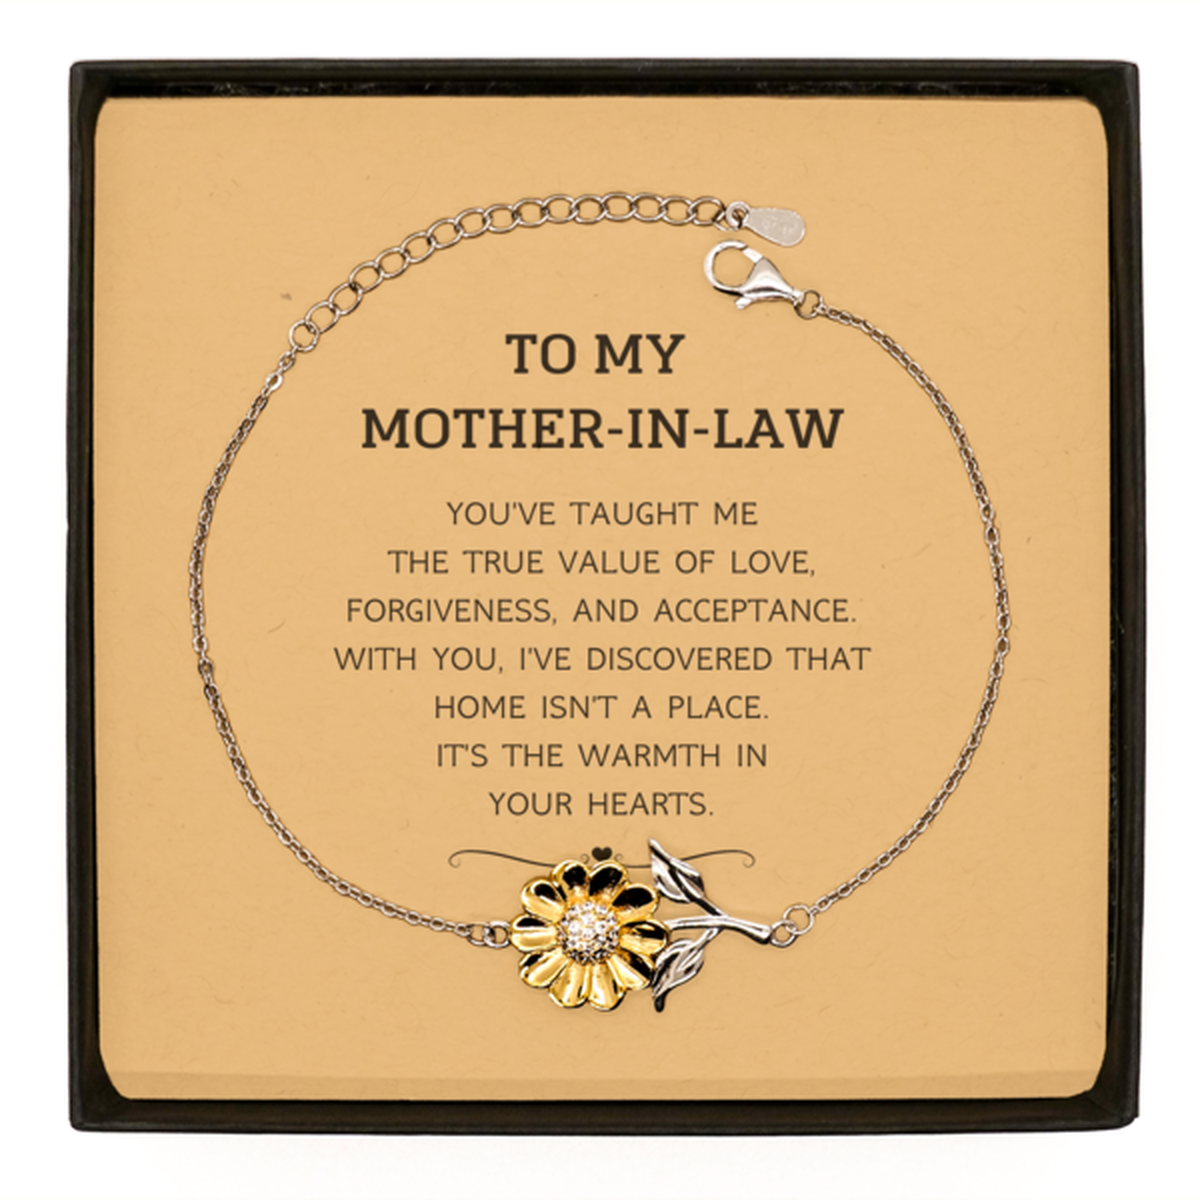 To My Mother-In-Law Gifts, You've taught me the true value of love, Thank You Gifts For Mother-In-Law, Birthday Sunflower Bracelet For Mother-In-Law